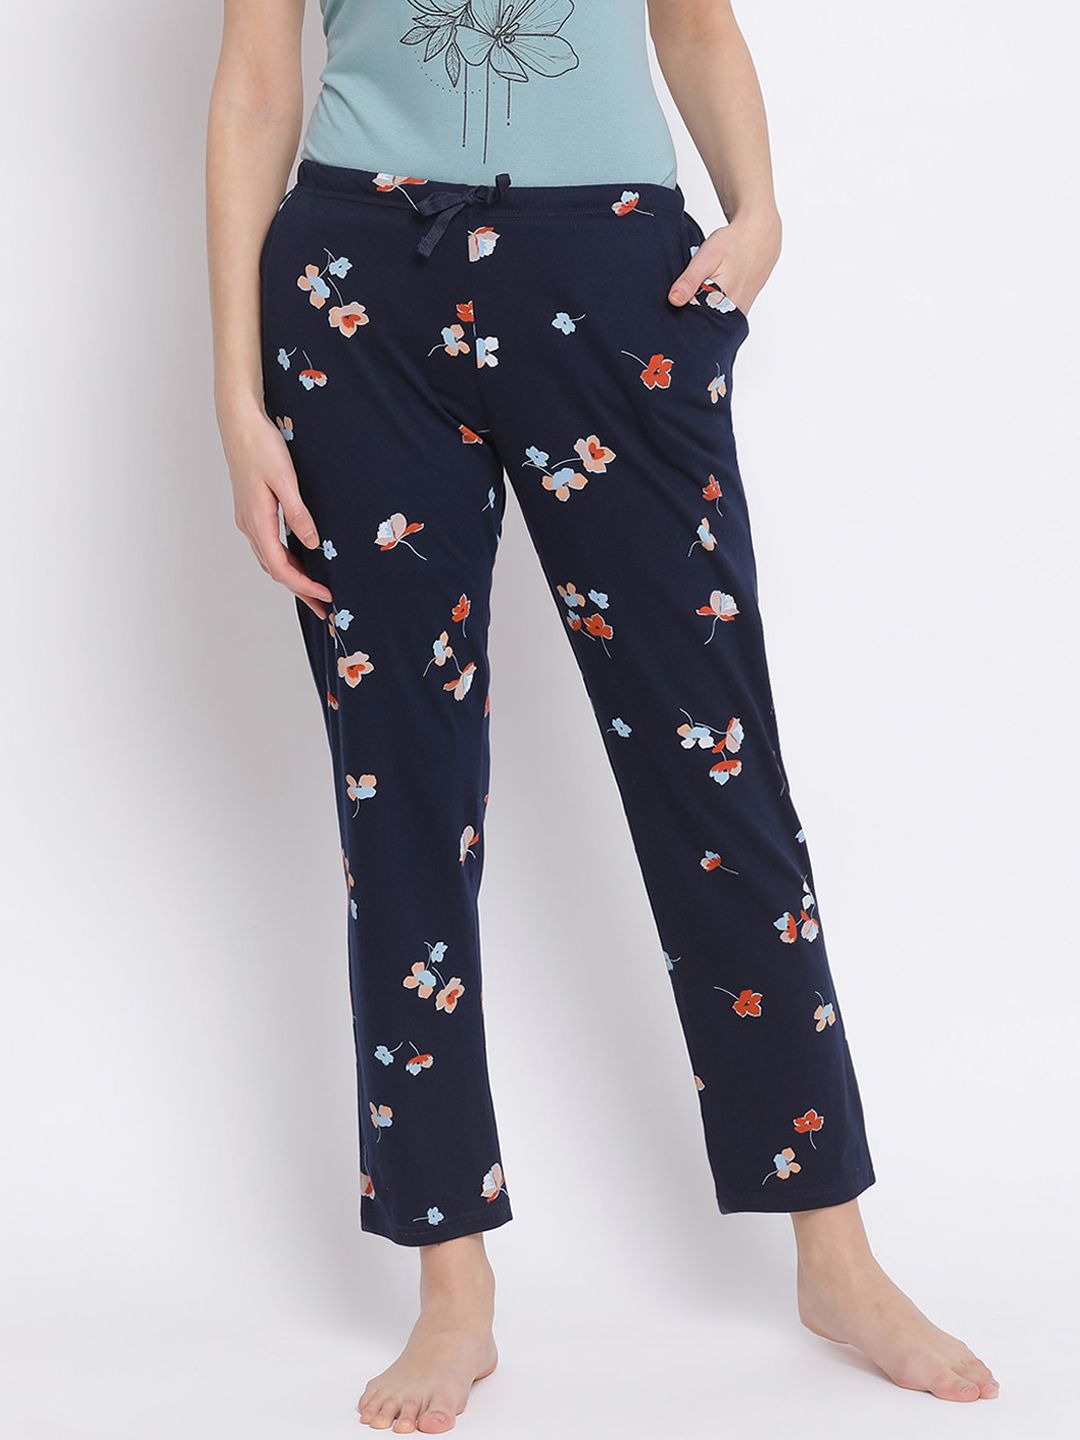 Kanvin Navy Blue Floral Printed Lounge Pants Price in India